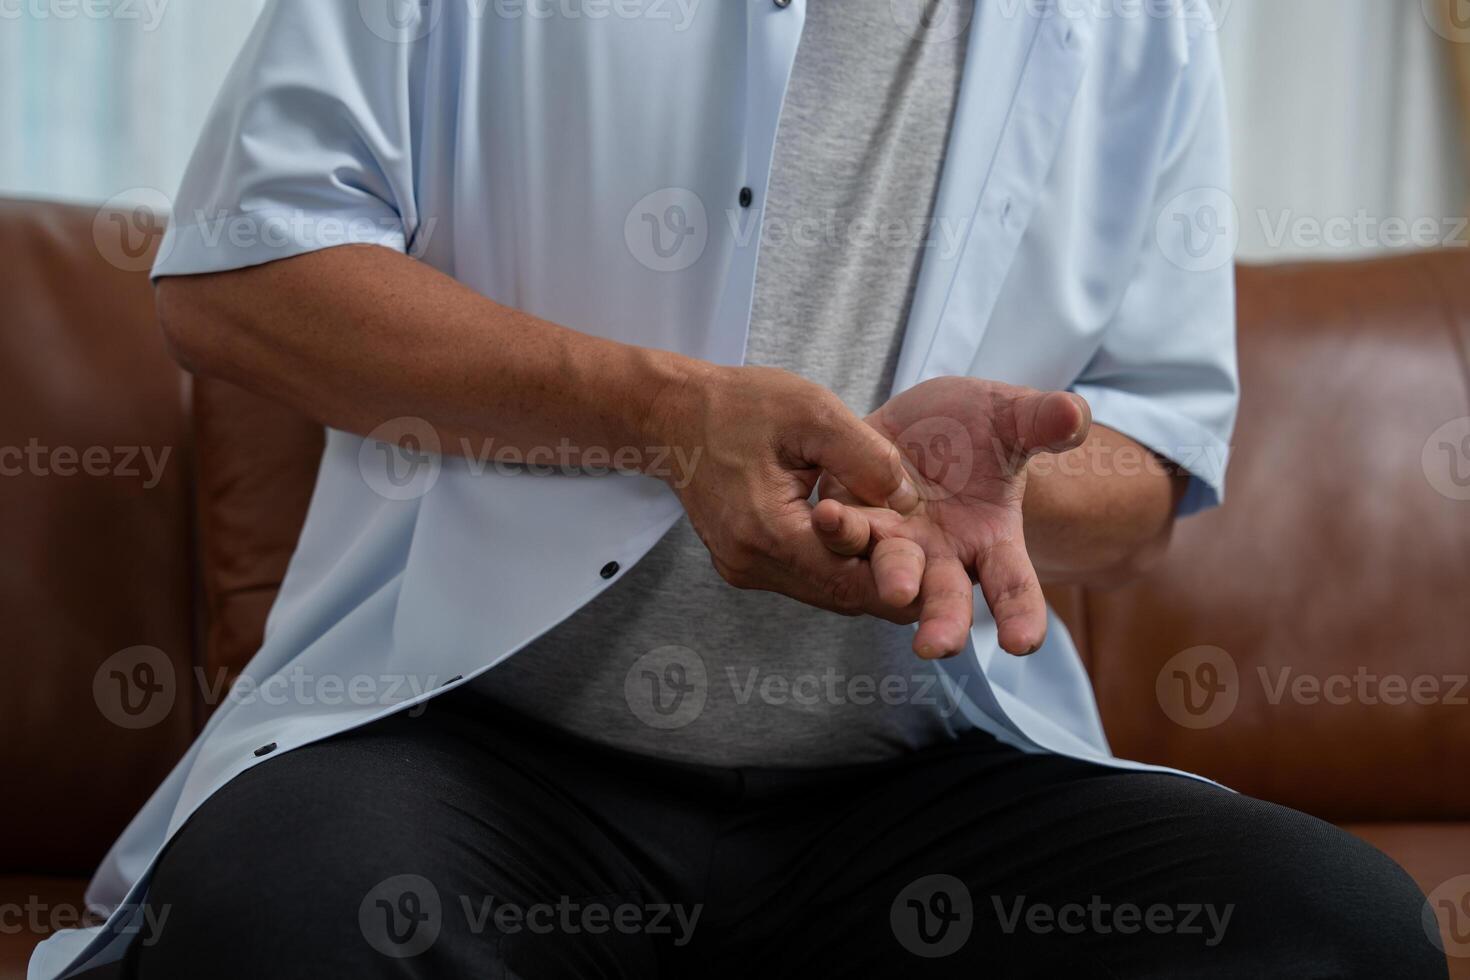 Elderly Asian male patients suffer from numbing pain in hands from rheumatoid arthritis. Senior men massage his hand with wrist pain. Concept of joint pain, rheumatoid arthritis, and hand problems. photo